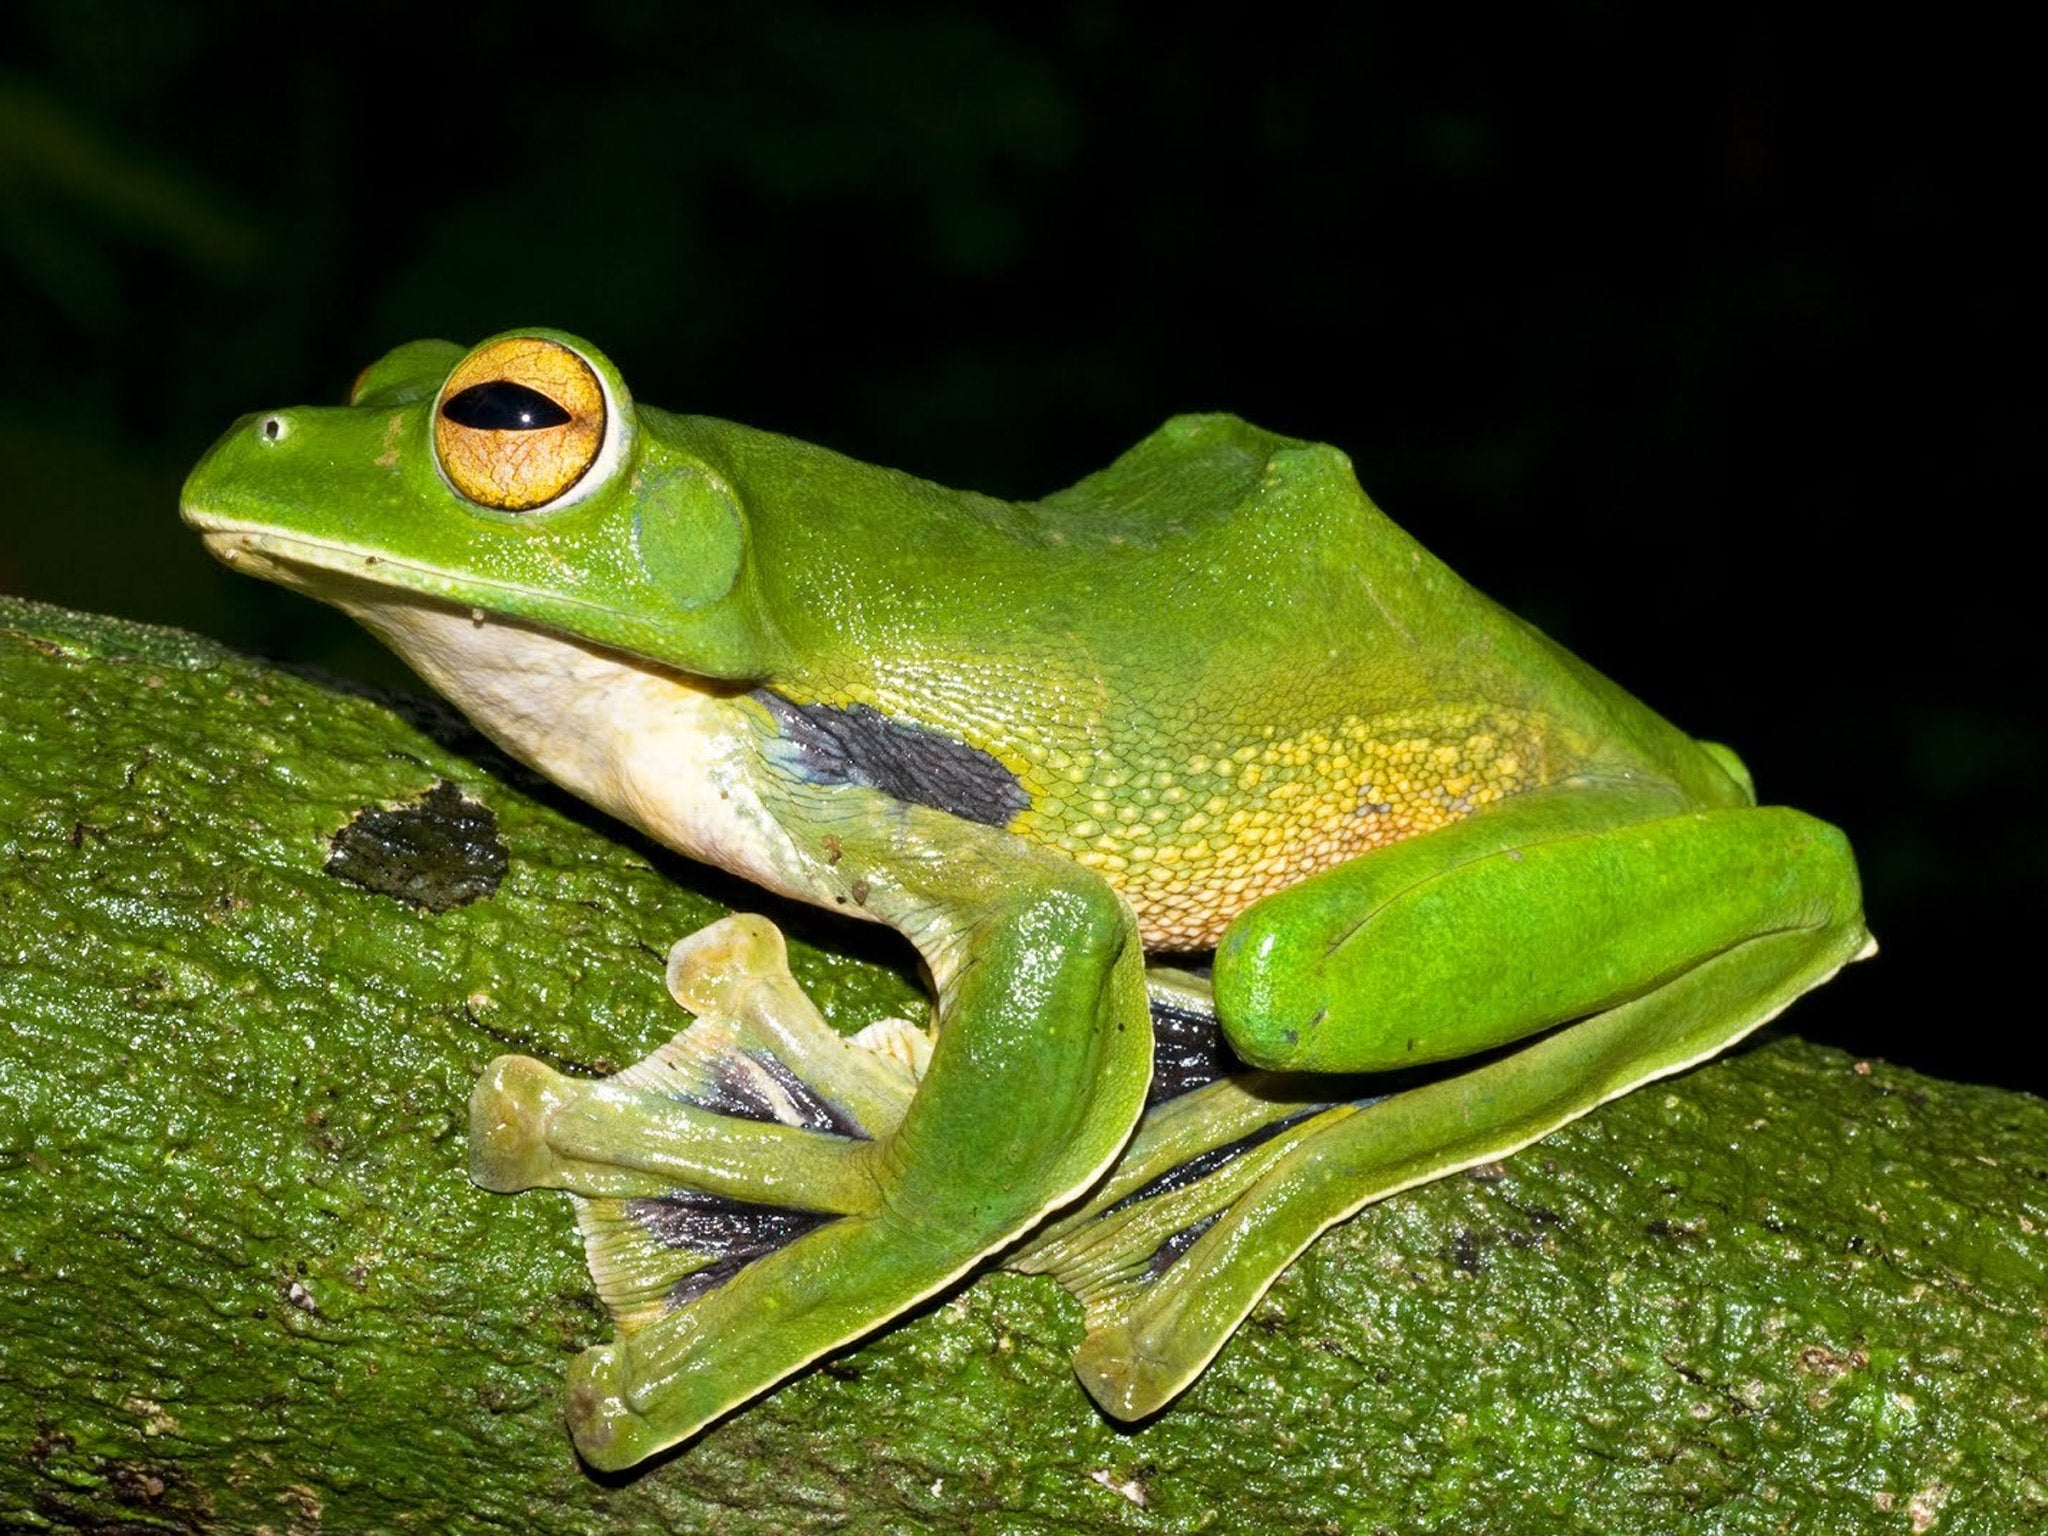 A Giant green flying frog which is among the new species found by scientists in the Greater Mekong region